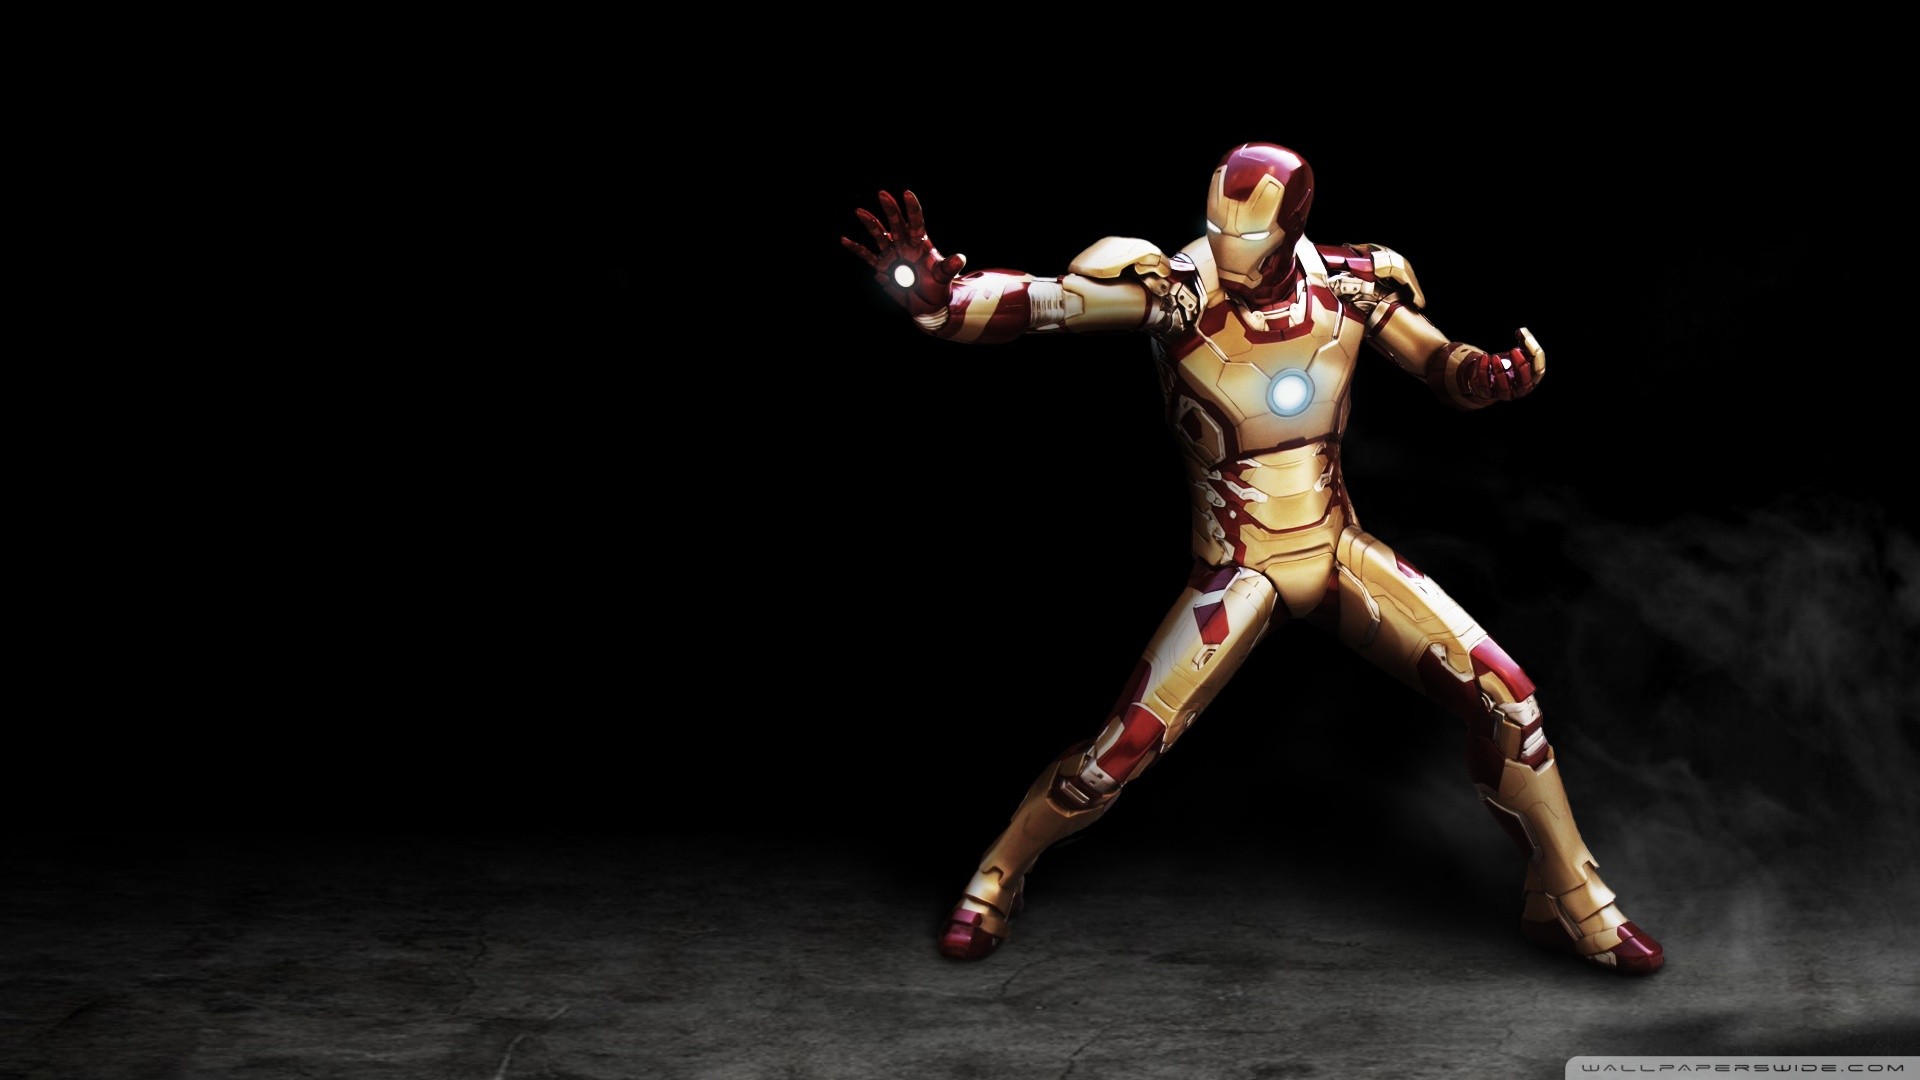 General 1920x1080 Iron Man armor simple background black background The Avengers watermarked superhero